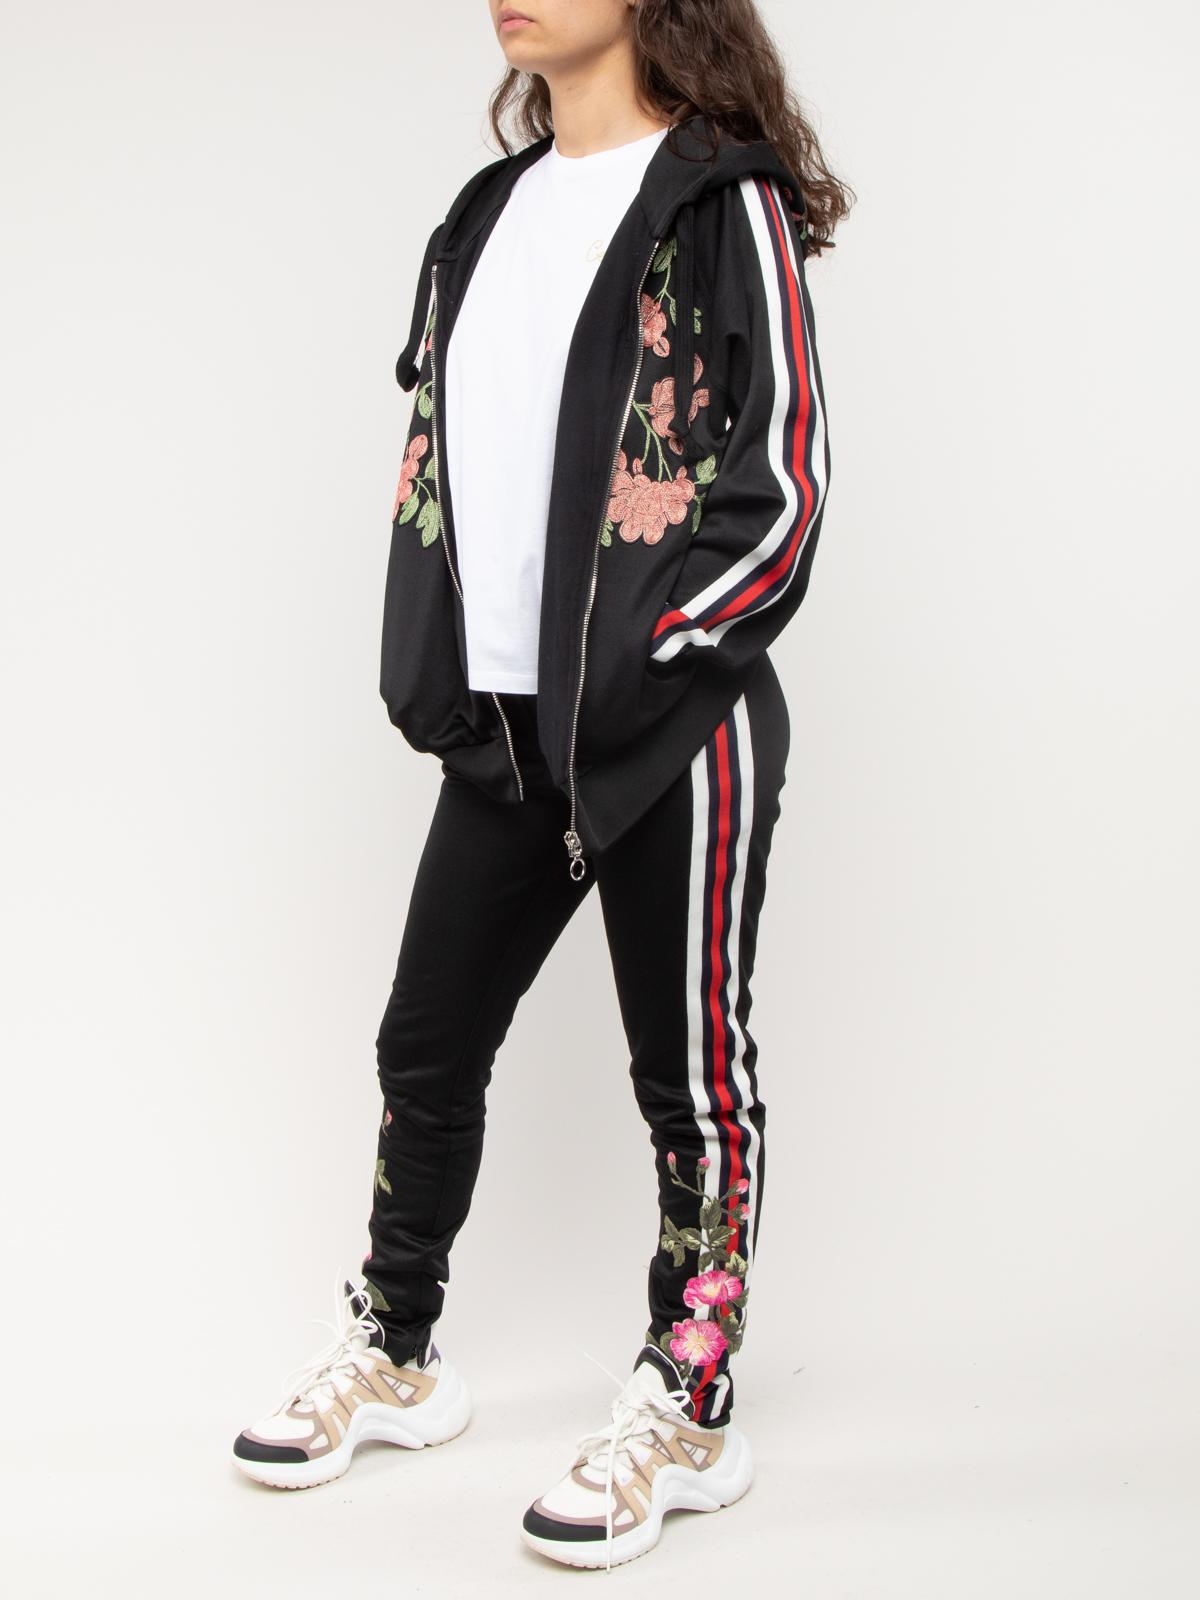 Gucci Embroidered Track Jacket and Jodpers Set Size S In Excellent Condition For Sale In London, GB